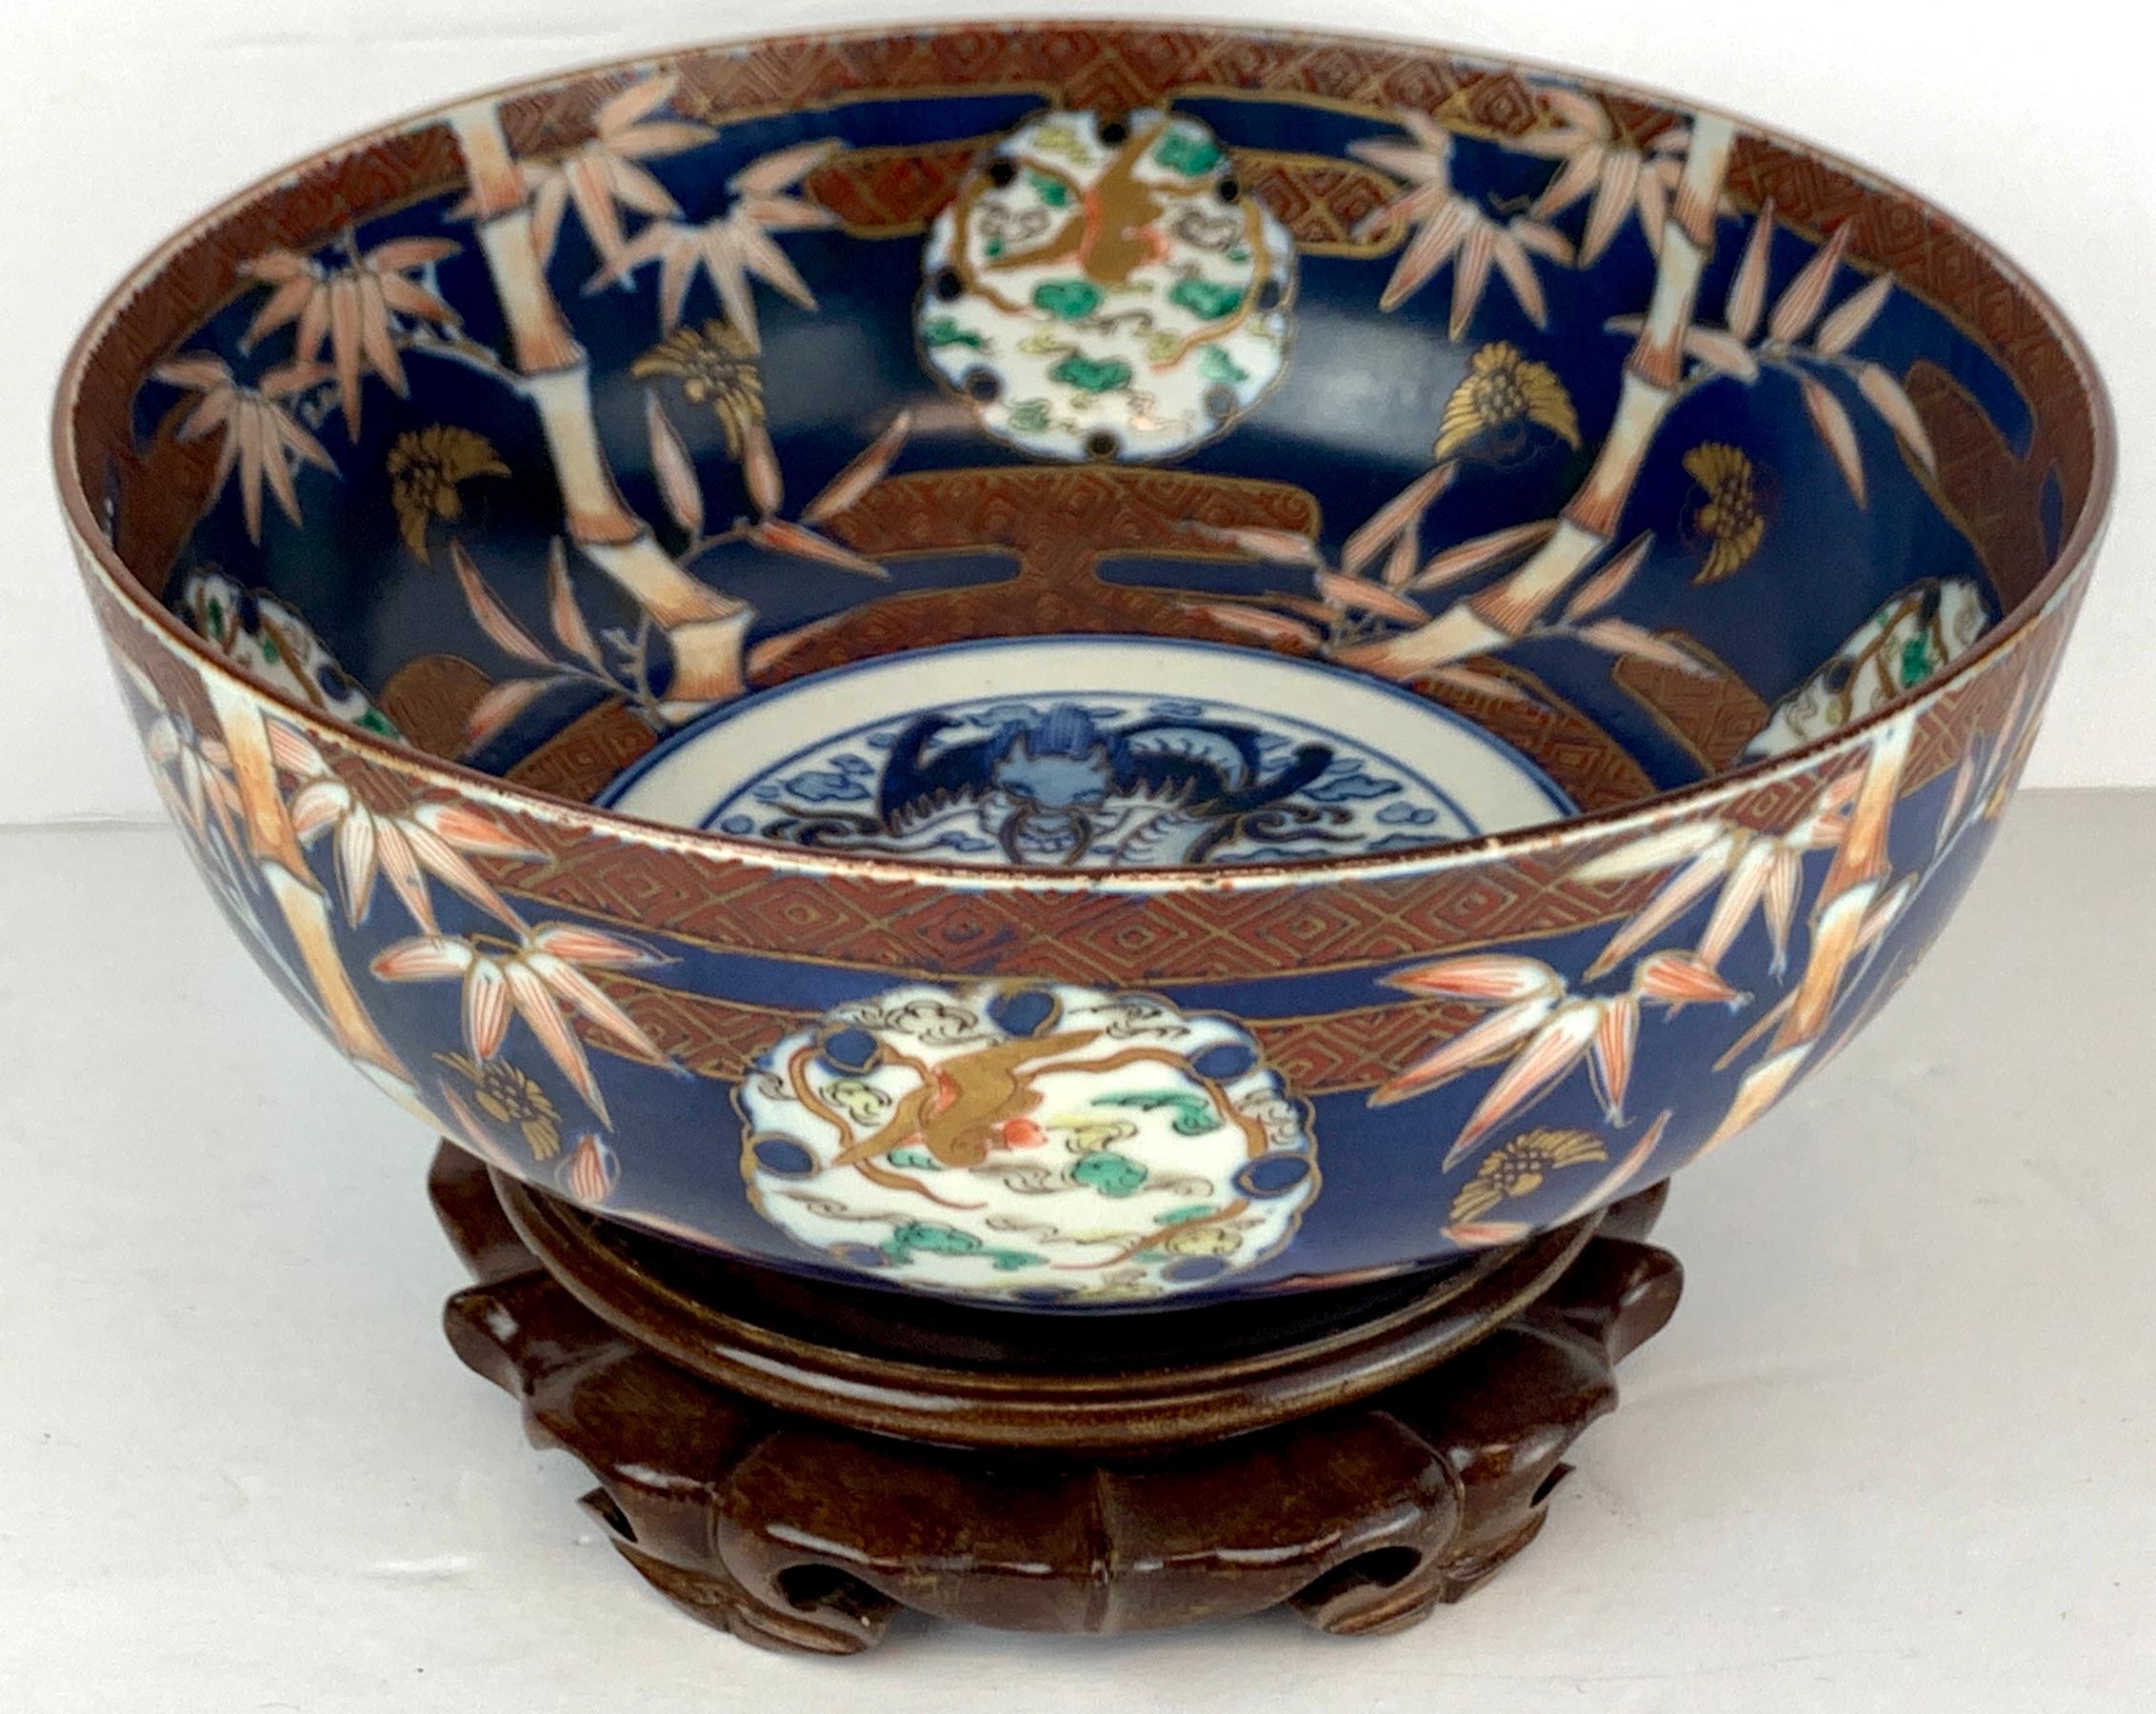 Fukagawa Imari blue background bowl and stand, beautifully decorated with bamboo motif with medallion with dragon. Marked with iron red Fukagawa mark. Complete with 6.5